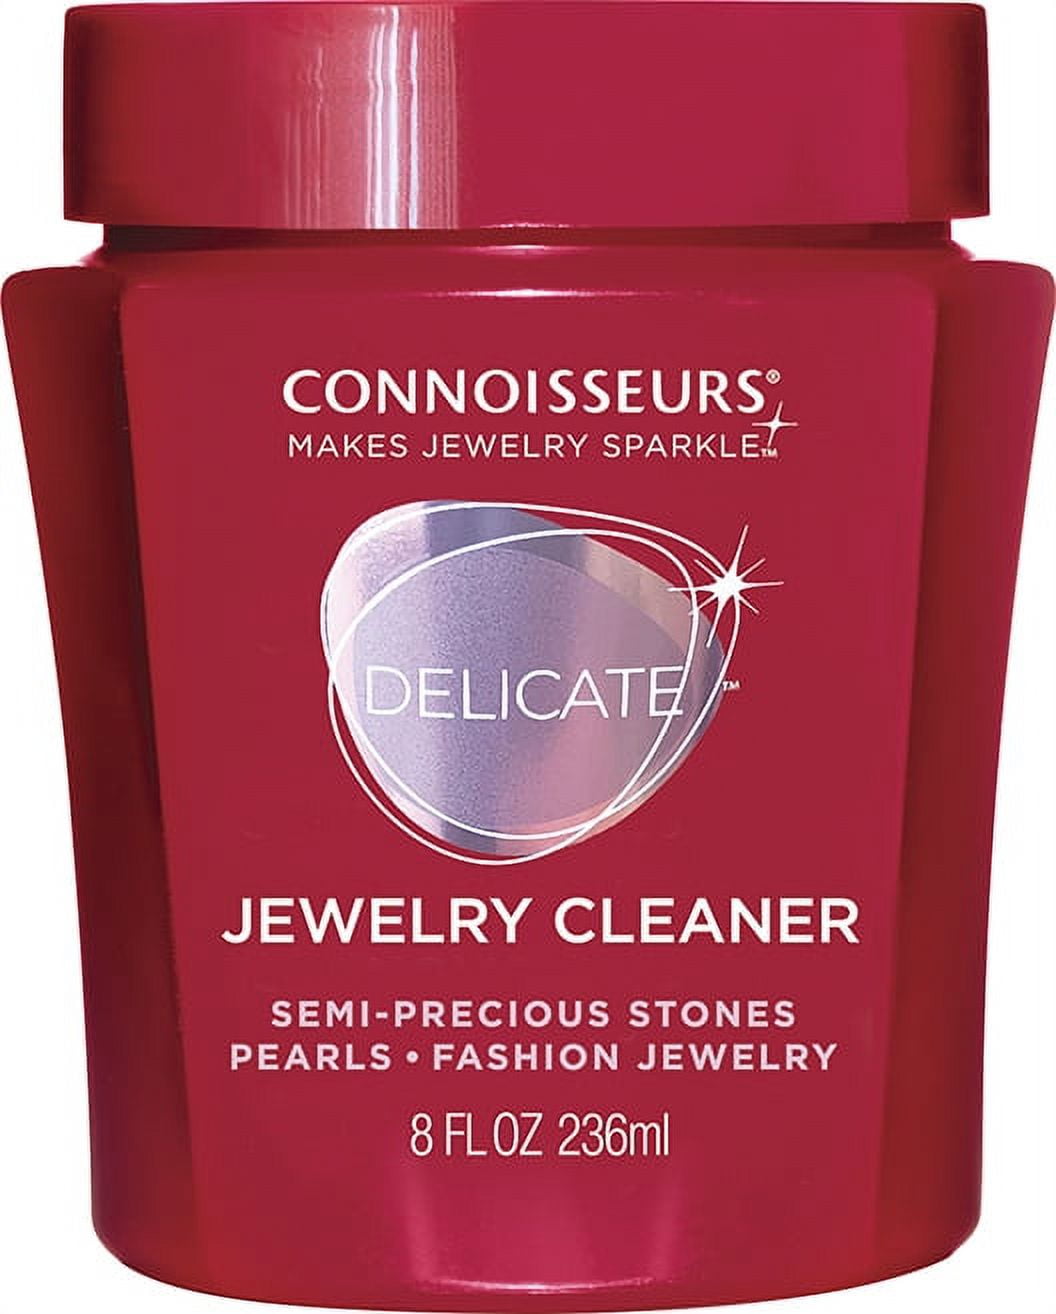 Connoisseurs Delicate Jewelry Cleaner - 8 oz jar